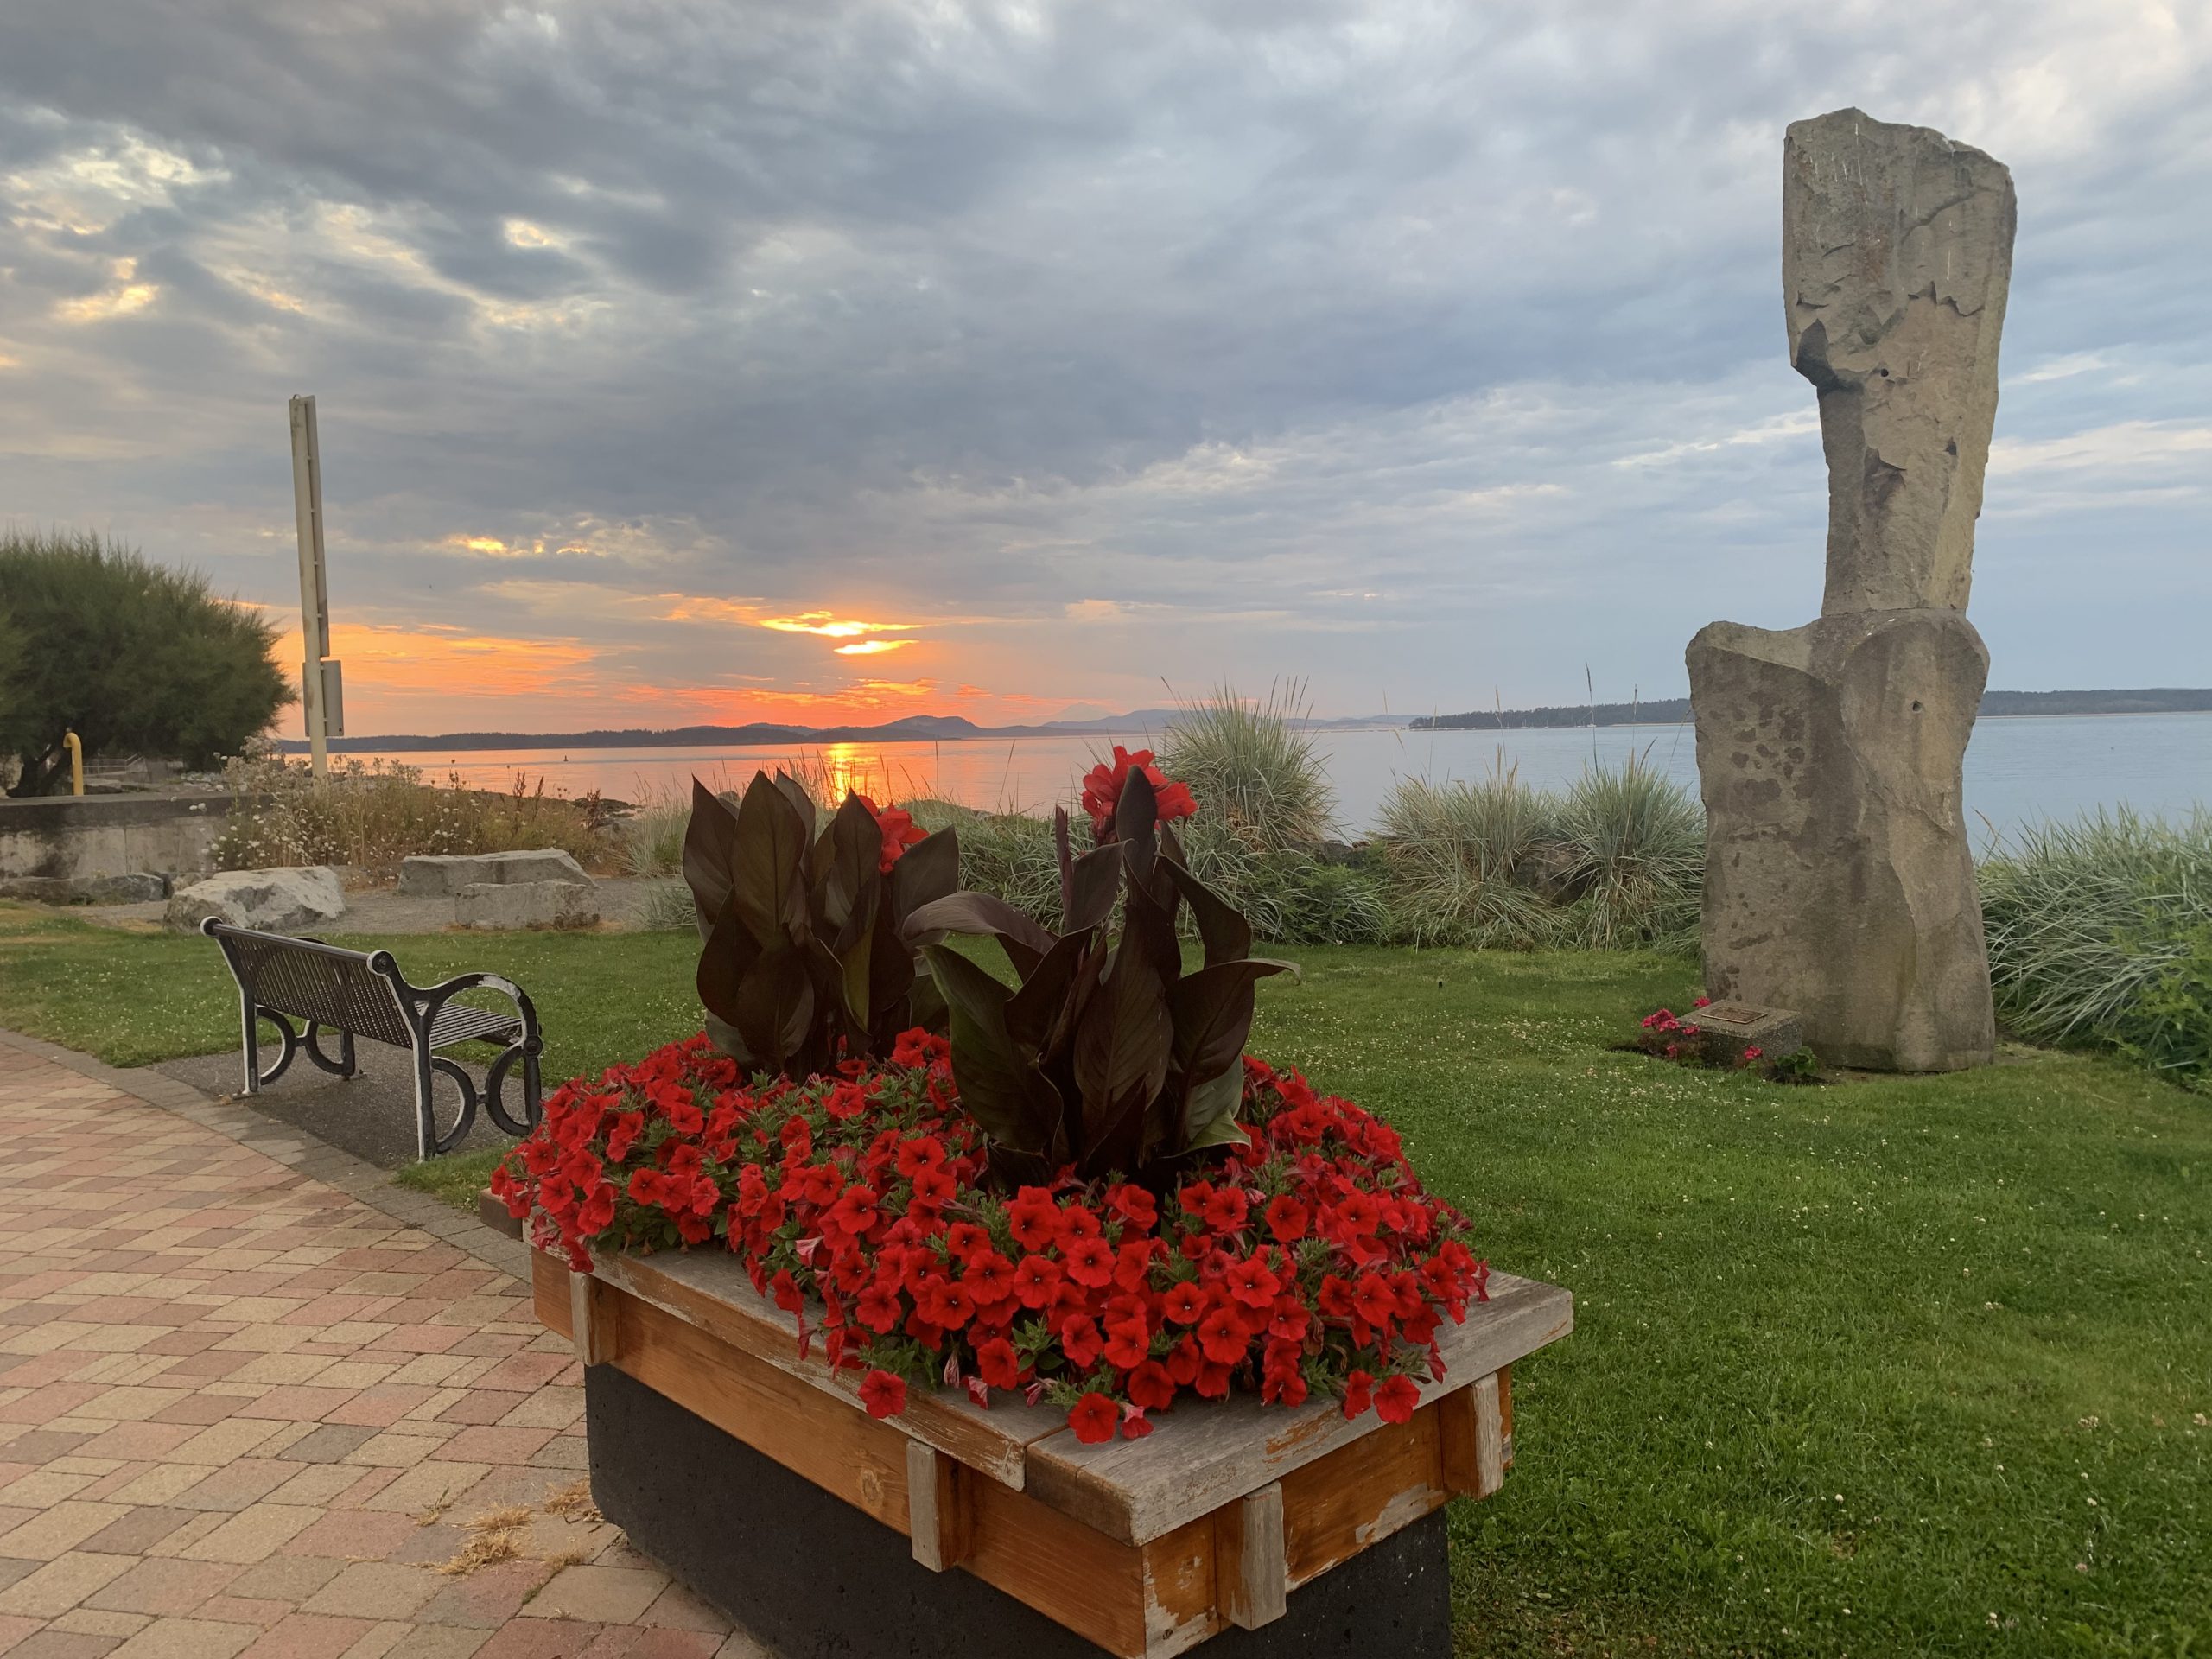  Oceanspray Park and The Keeper at Sunset 